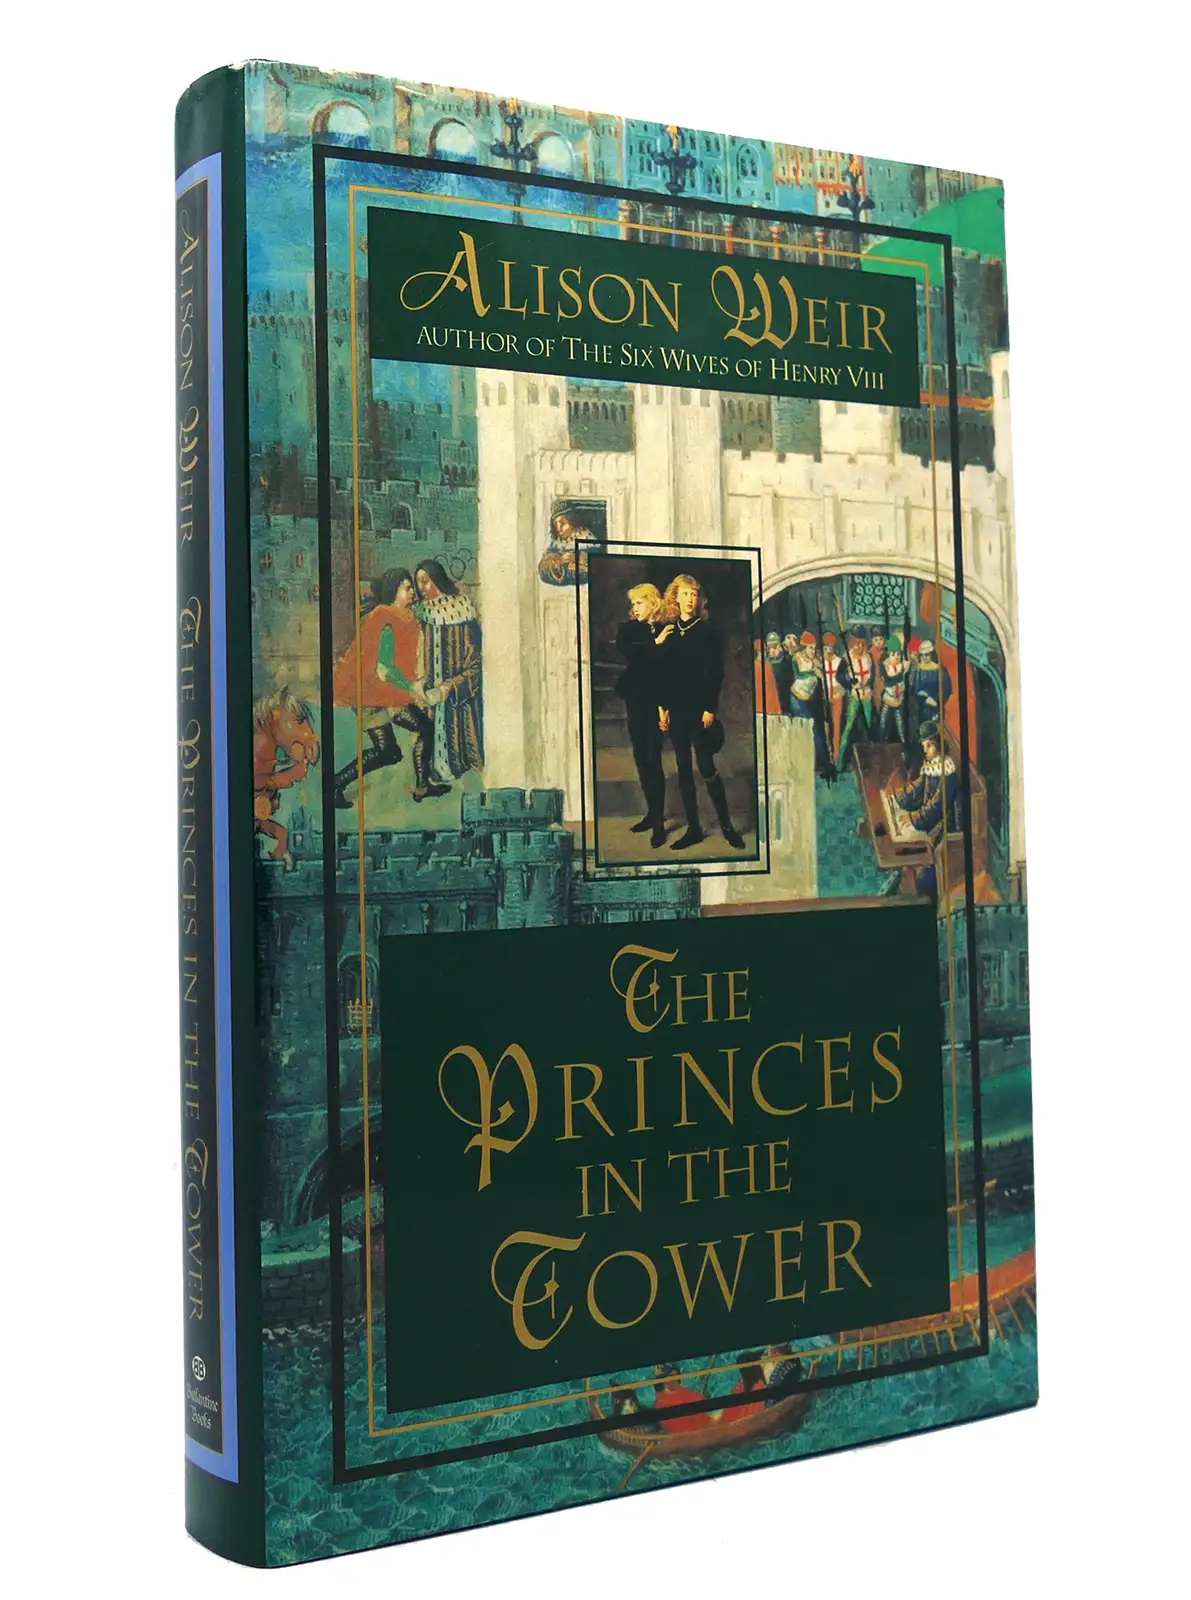 The Princes in the Tower book by Alison Weir